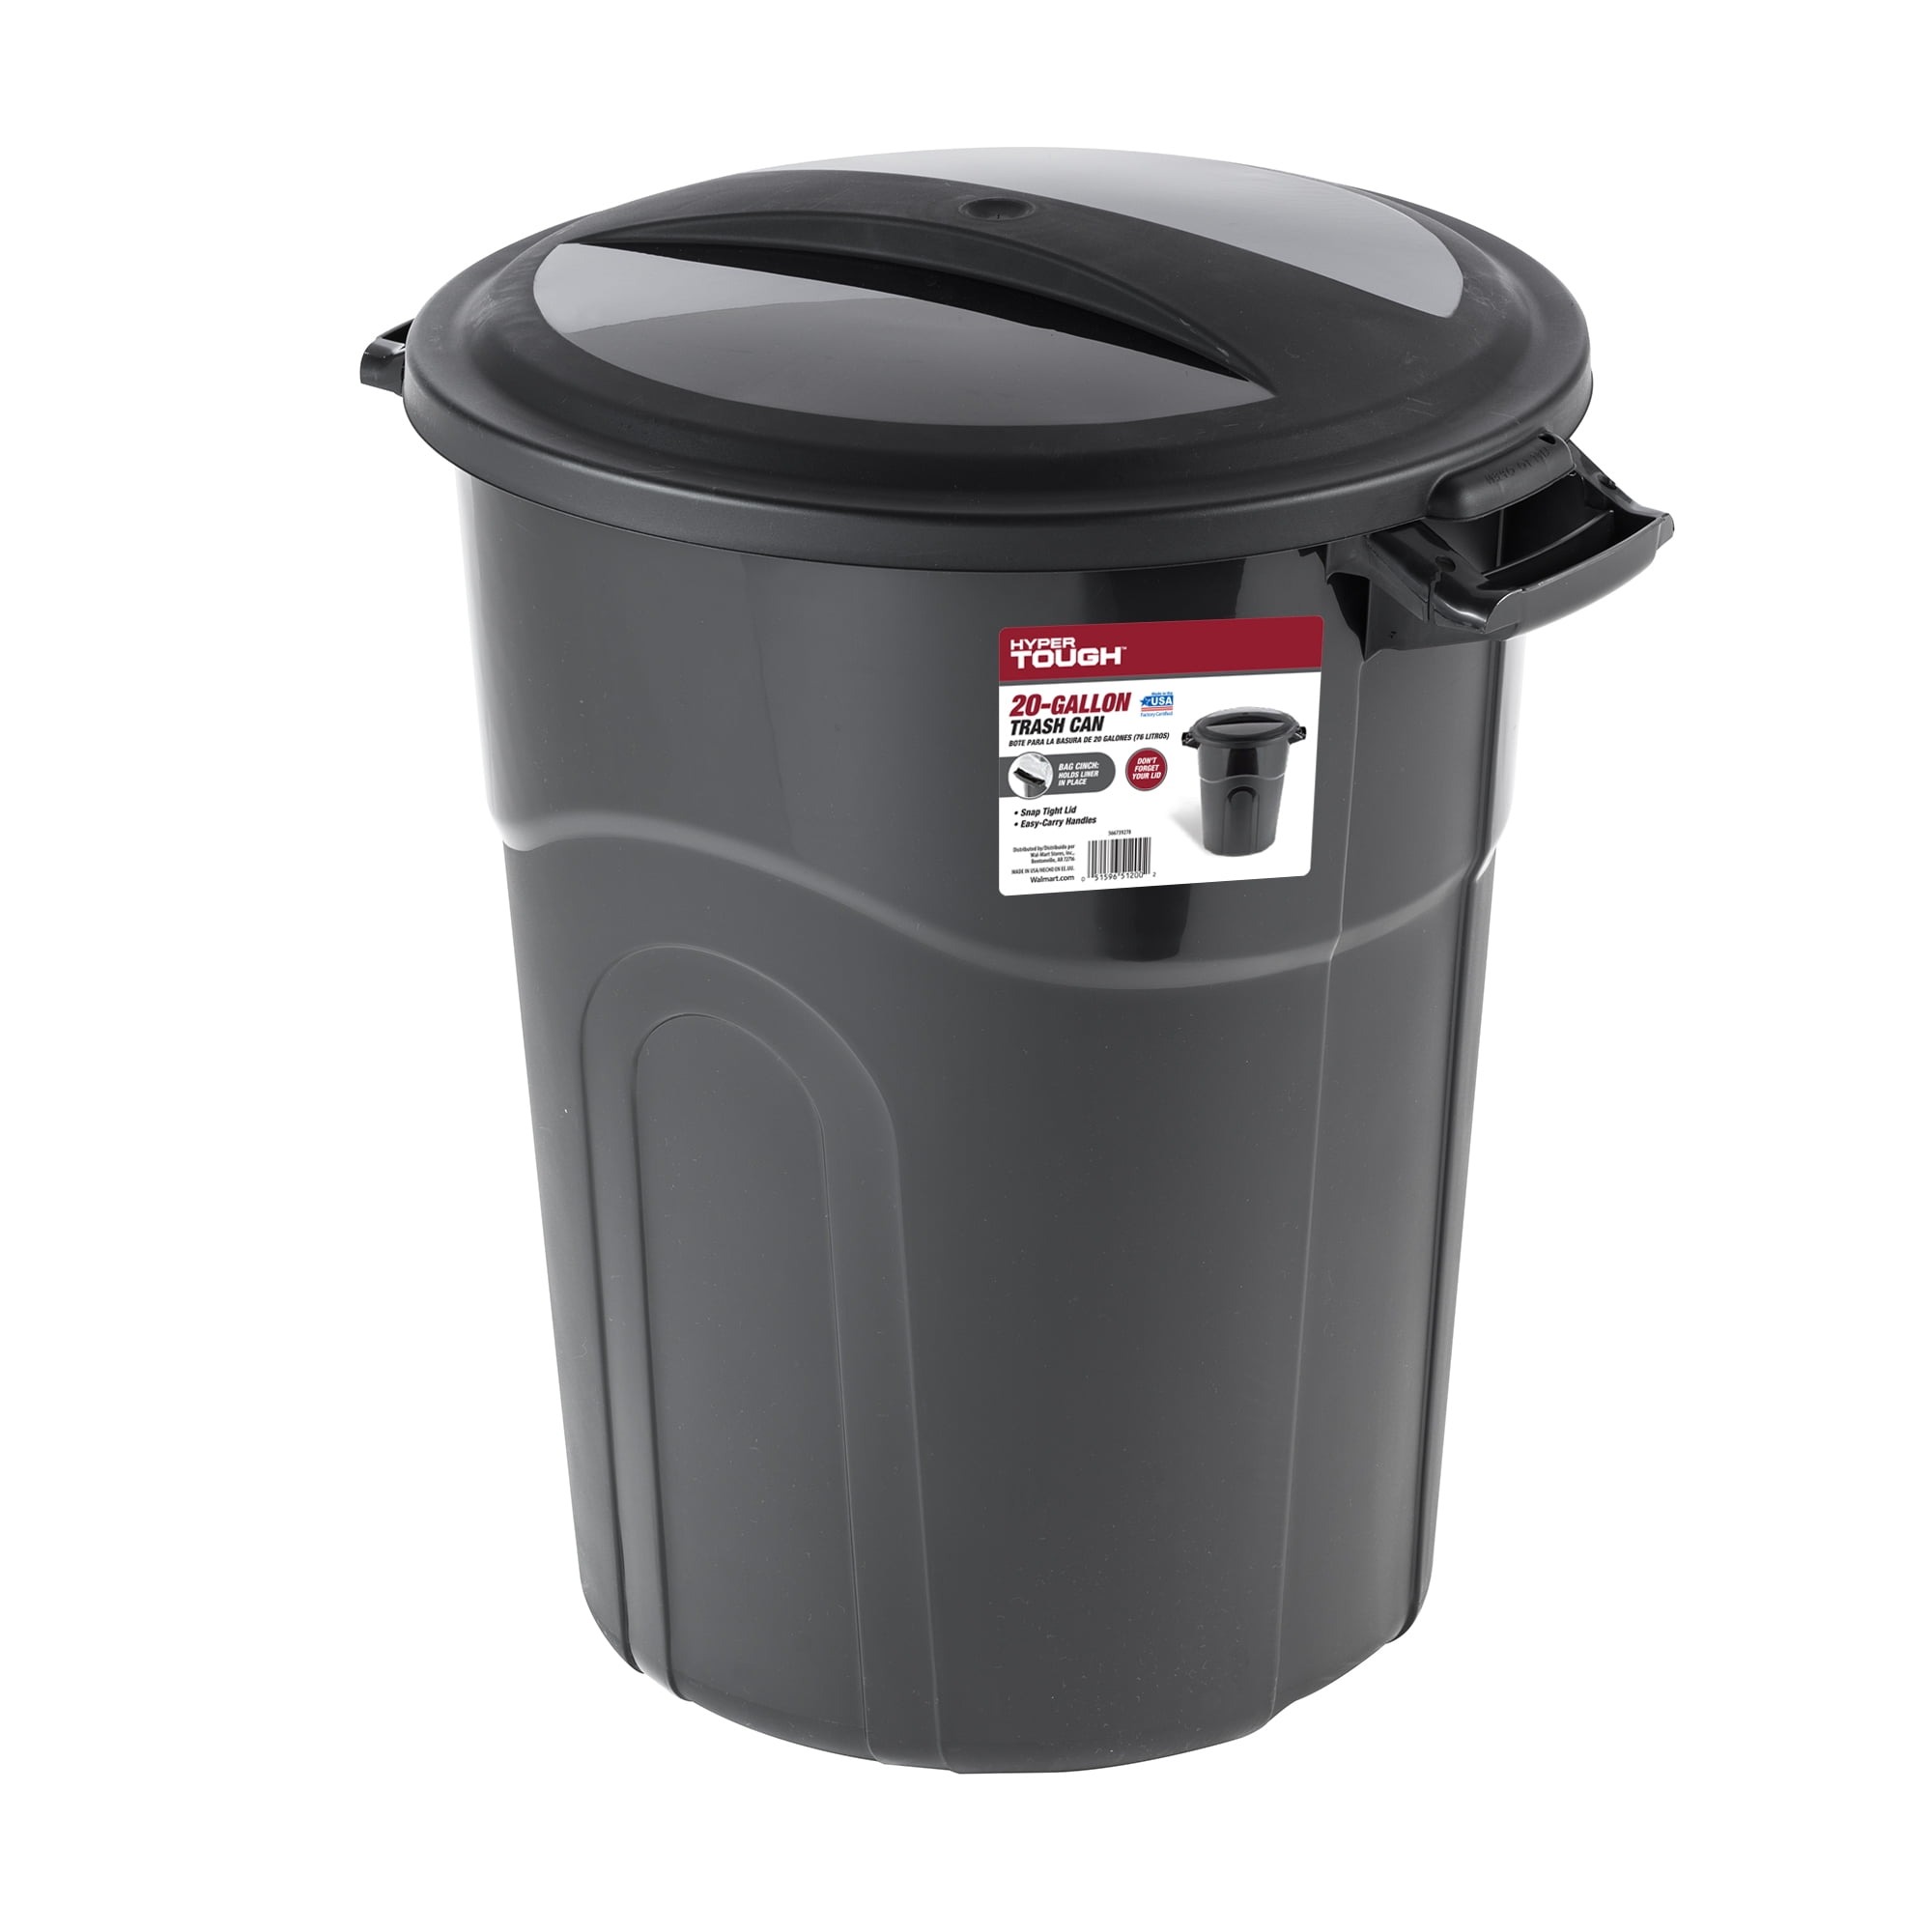 https://citizenside.com/wp-content/uploads/2023/12/9-incredible-trash-can-20-gallon-for-2023-1702569435.jpg